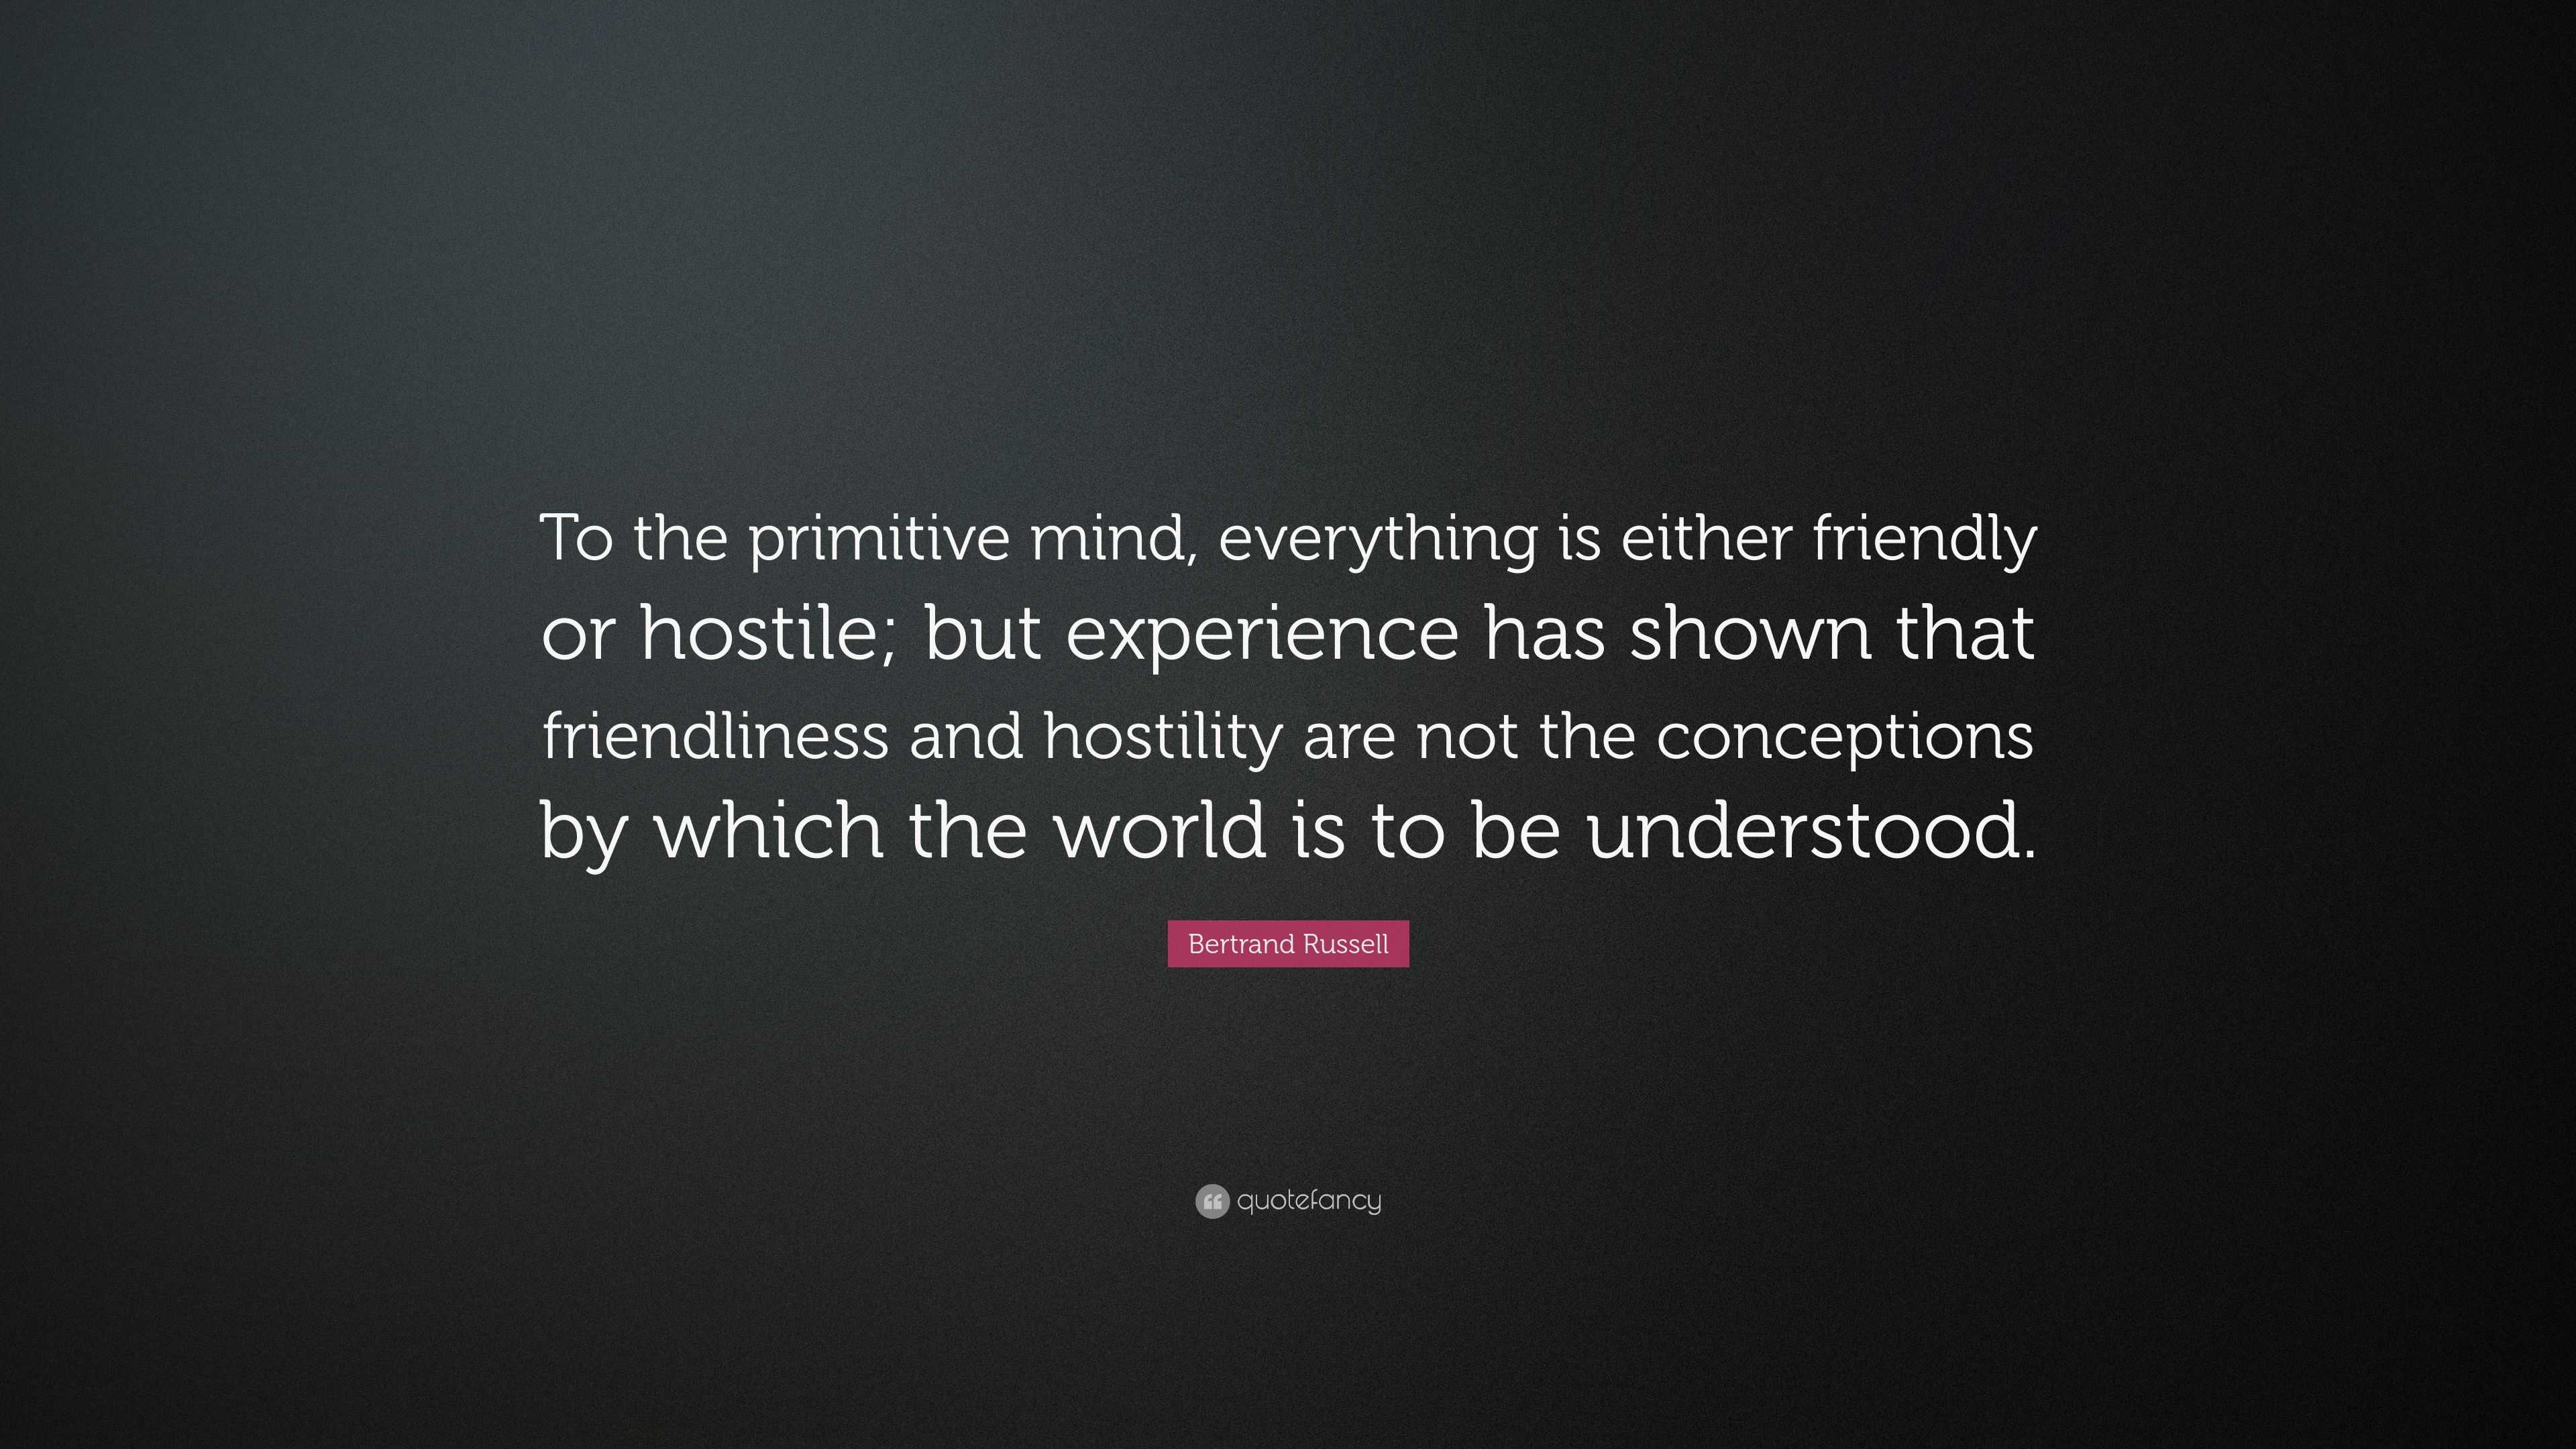 Bertrand Russell Quote: “To the primitive mind, everything is either ...